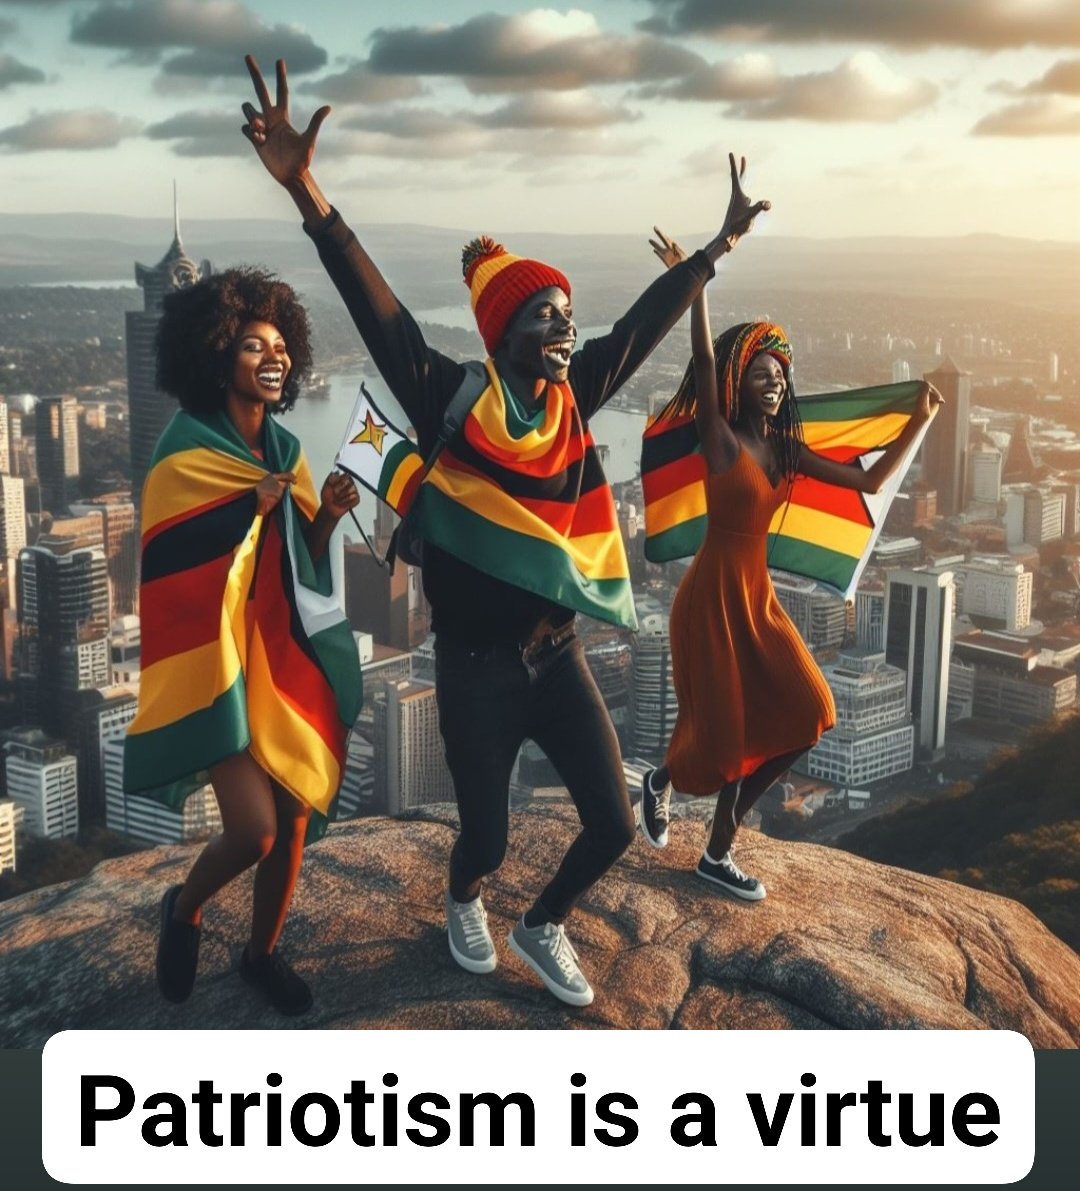 Patriotism is considered a virtue for several reasons: 1. Love and loyalty 2. Sense of belonging 3. National pride 4. Selflessness 5. Preservation of heritage 6. National unity 7. Defense and protection 8. Civic engagement 9. Respect for institutions 10.Inspiration for greatness